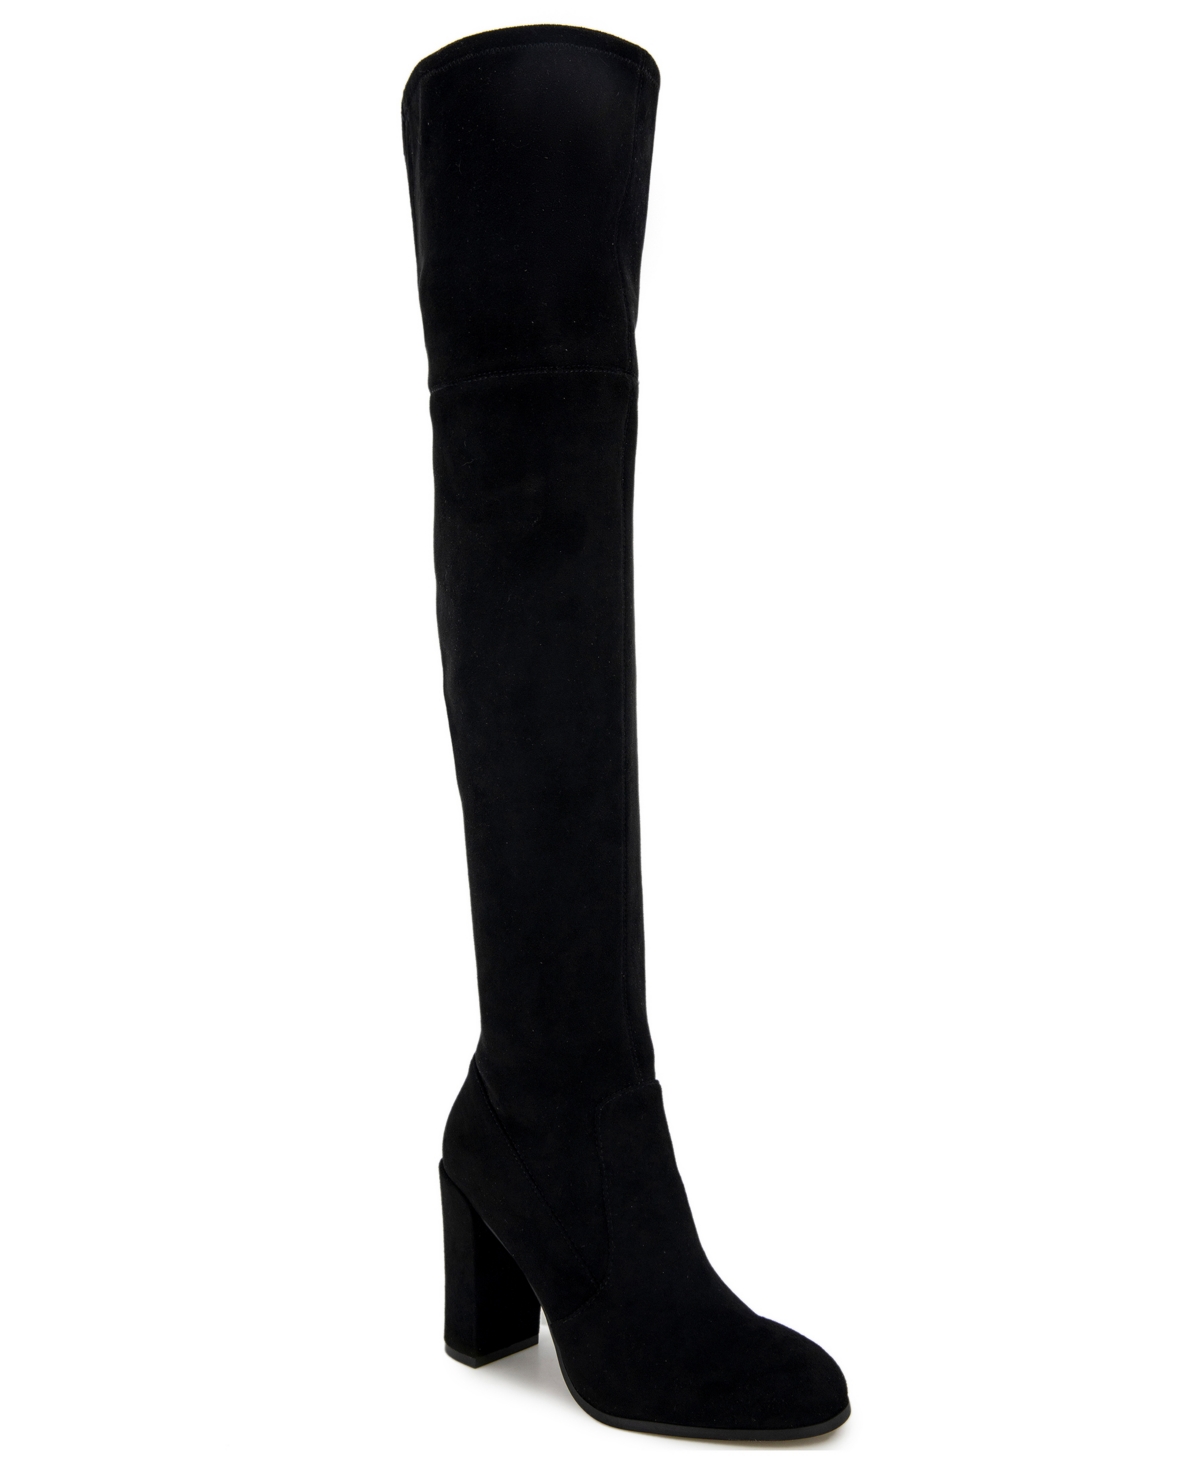 Women's Justin Over the Knee Boots - Mushroom